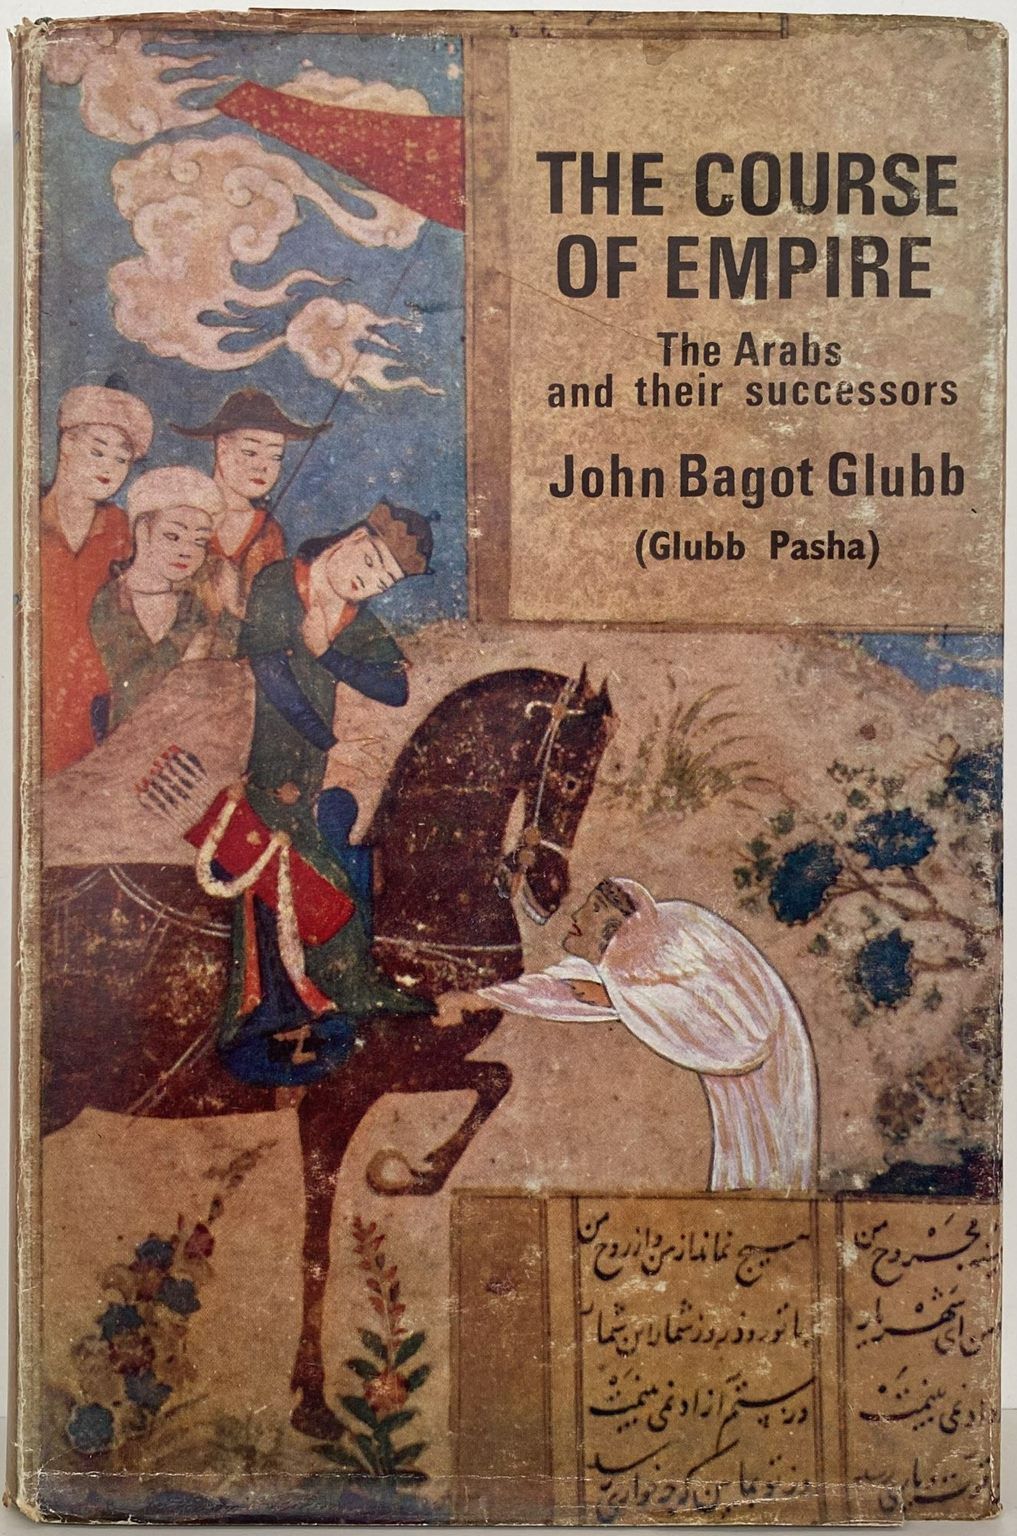 THE COURSE OF EMPIRE: The Arabs and their successors